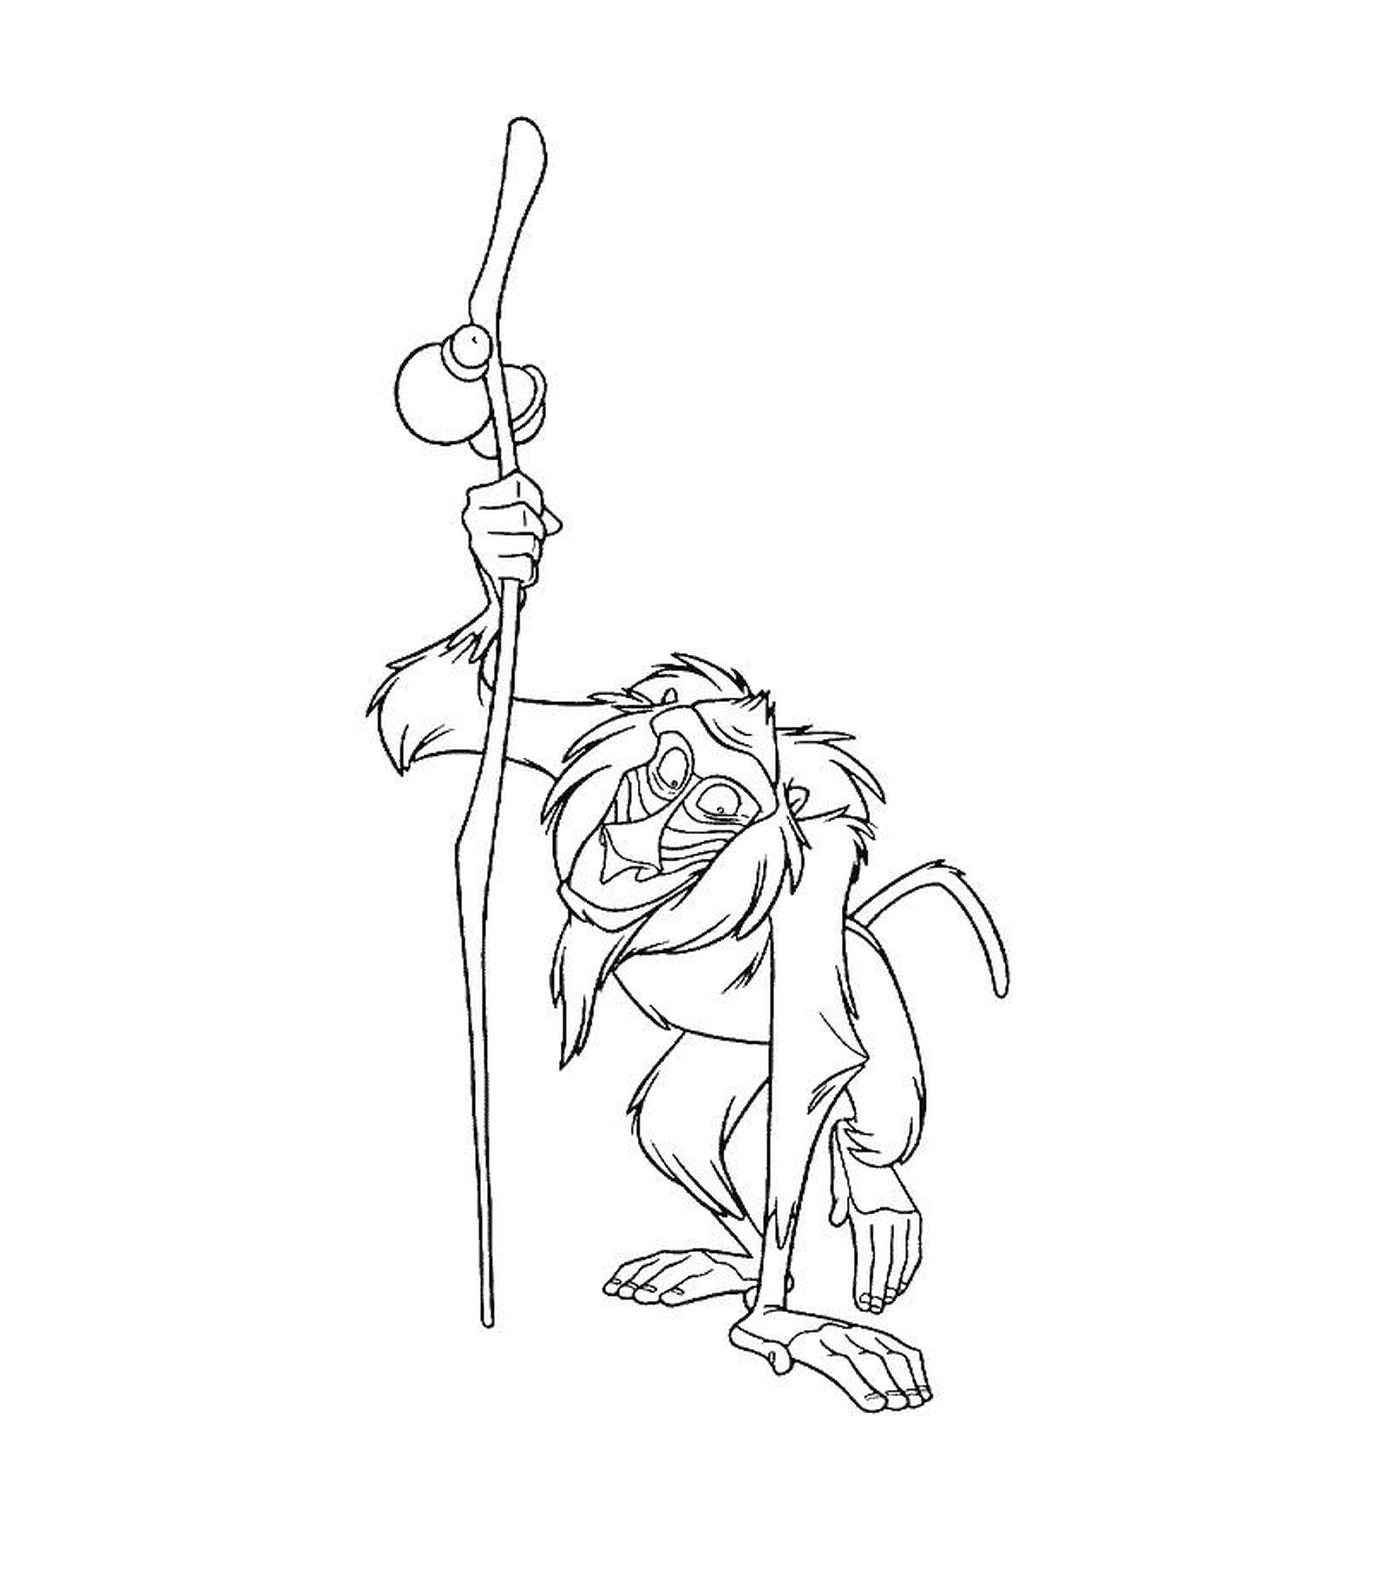  Rafiki, character of the Lion King 